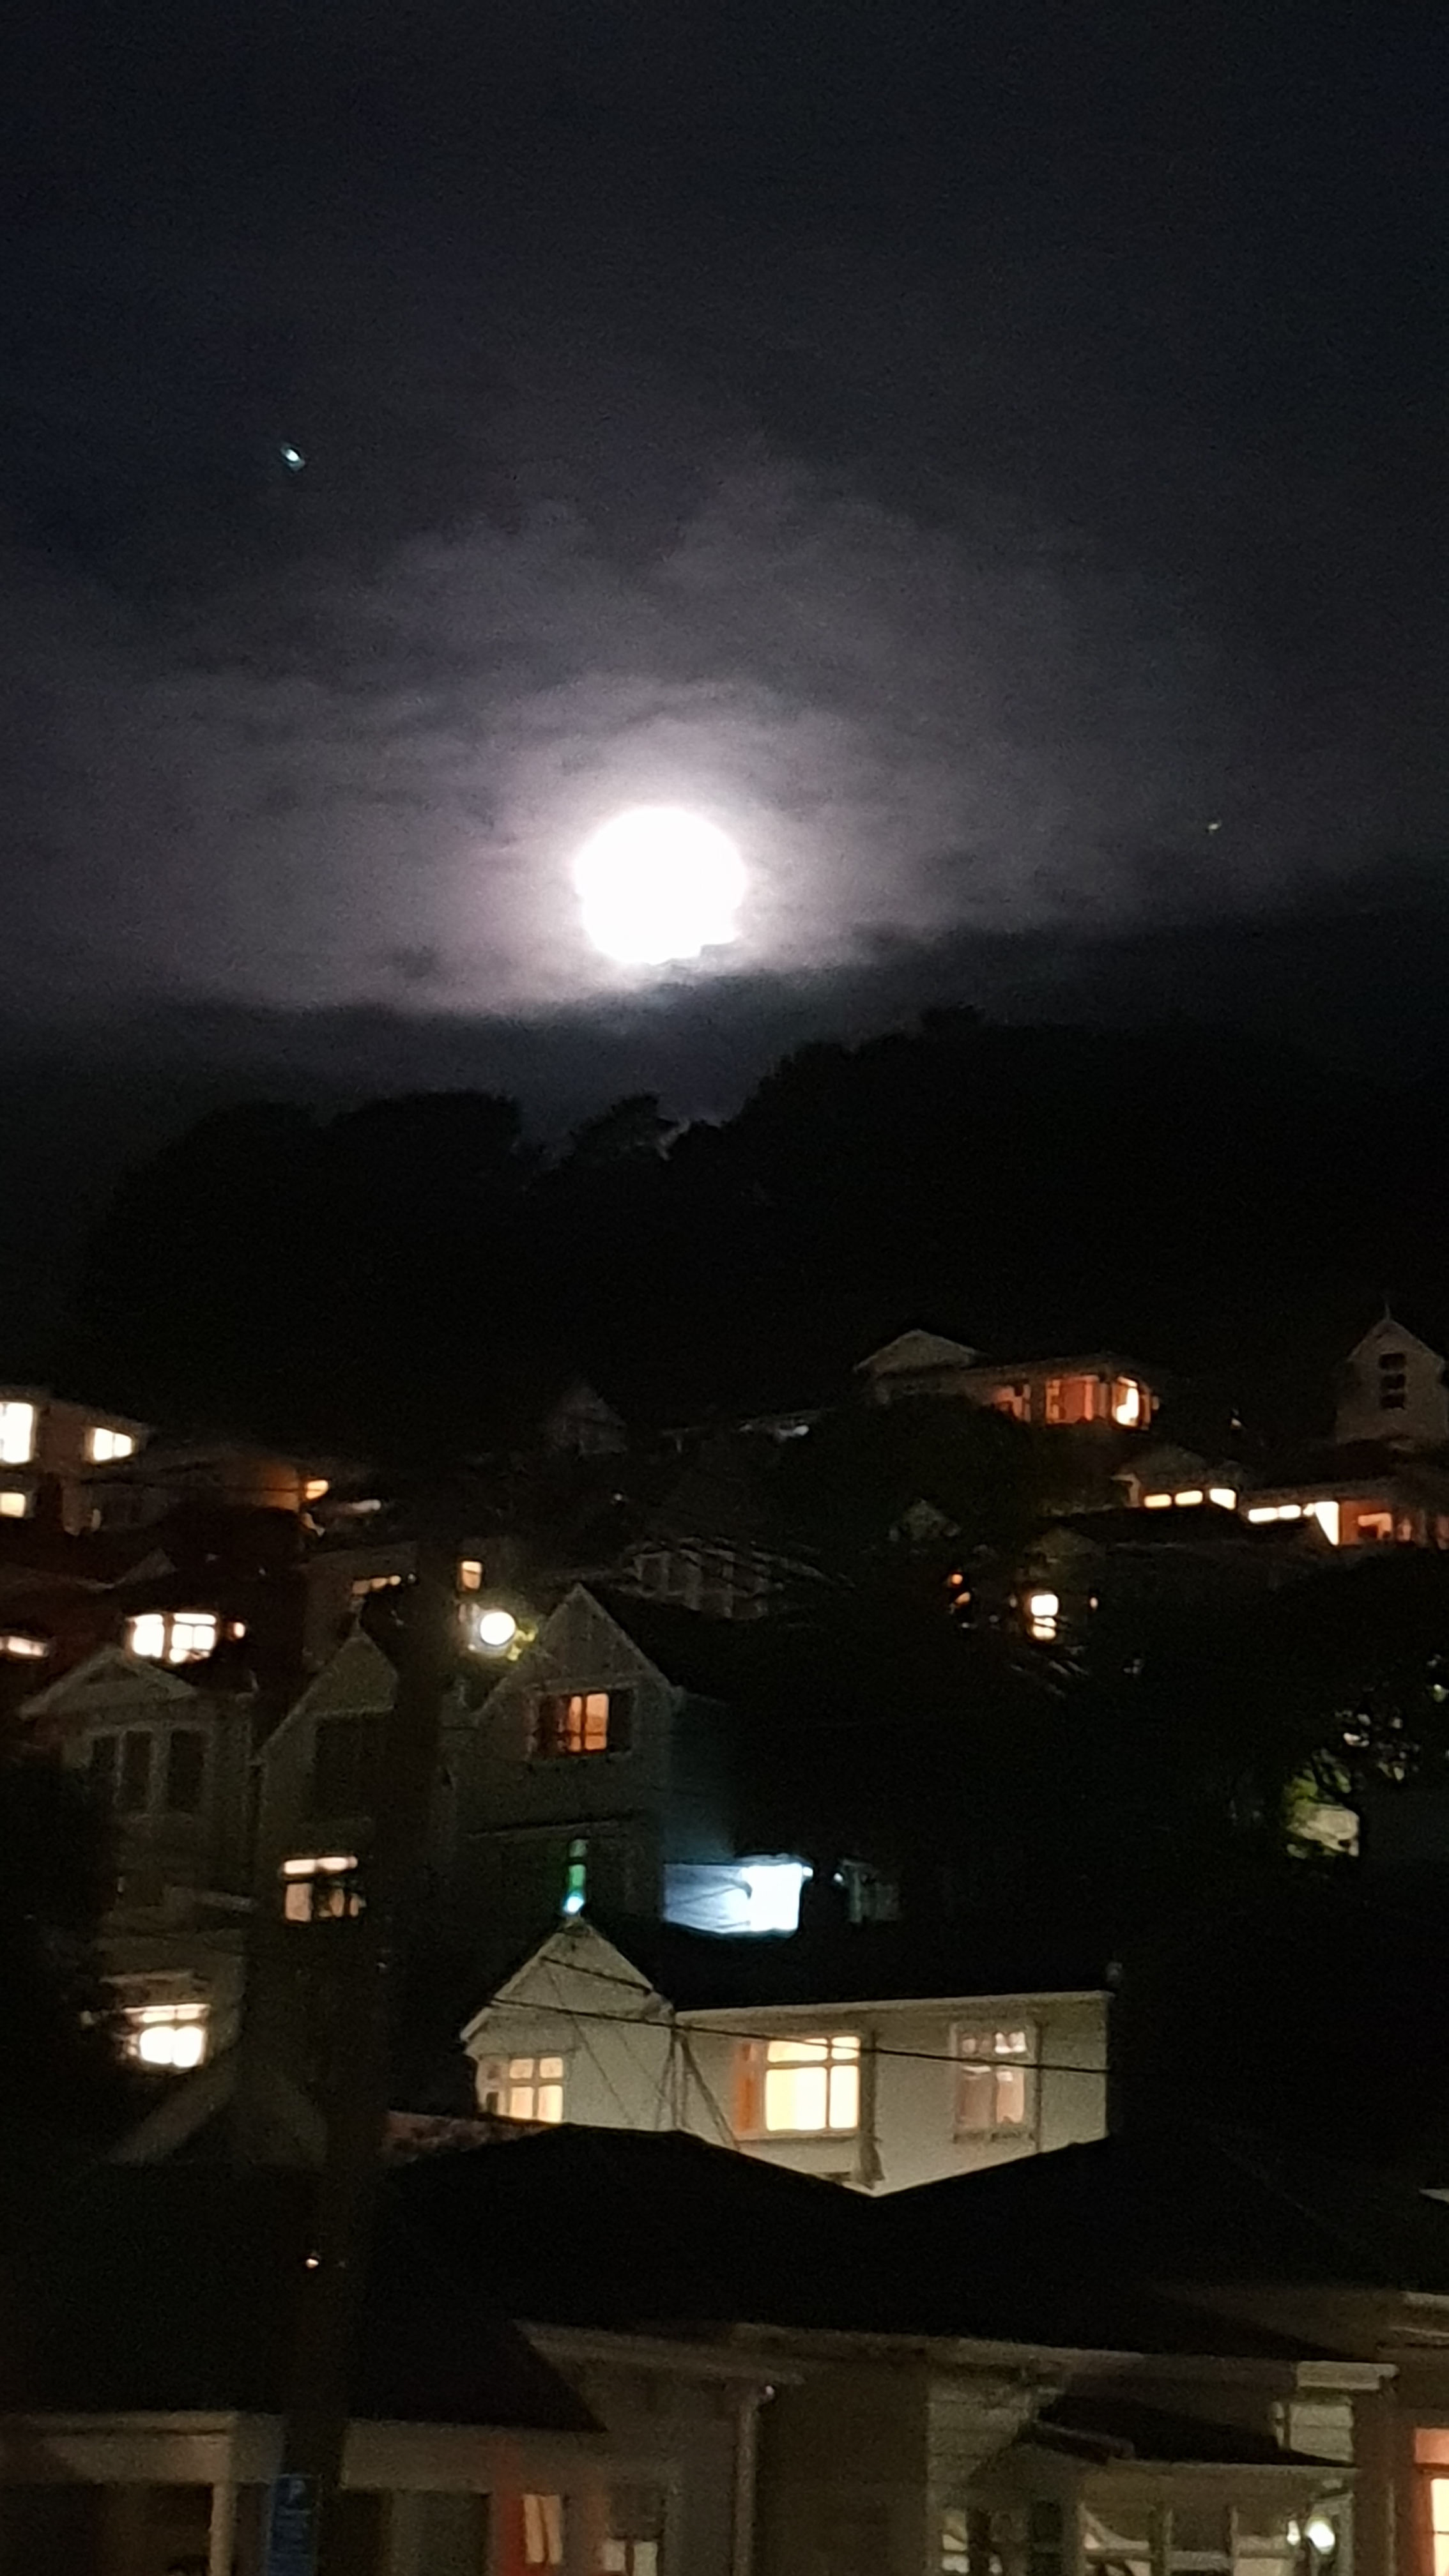 A full moon rising over the hills edge. The lights of houses fill the bottom of the scene